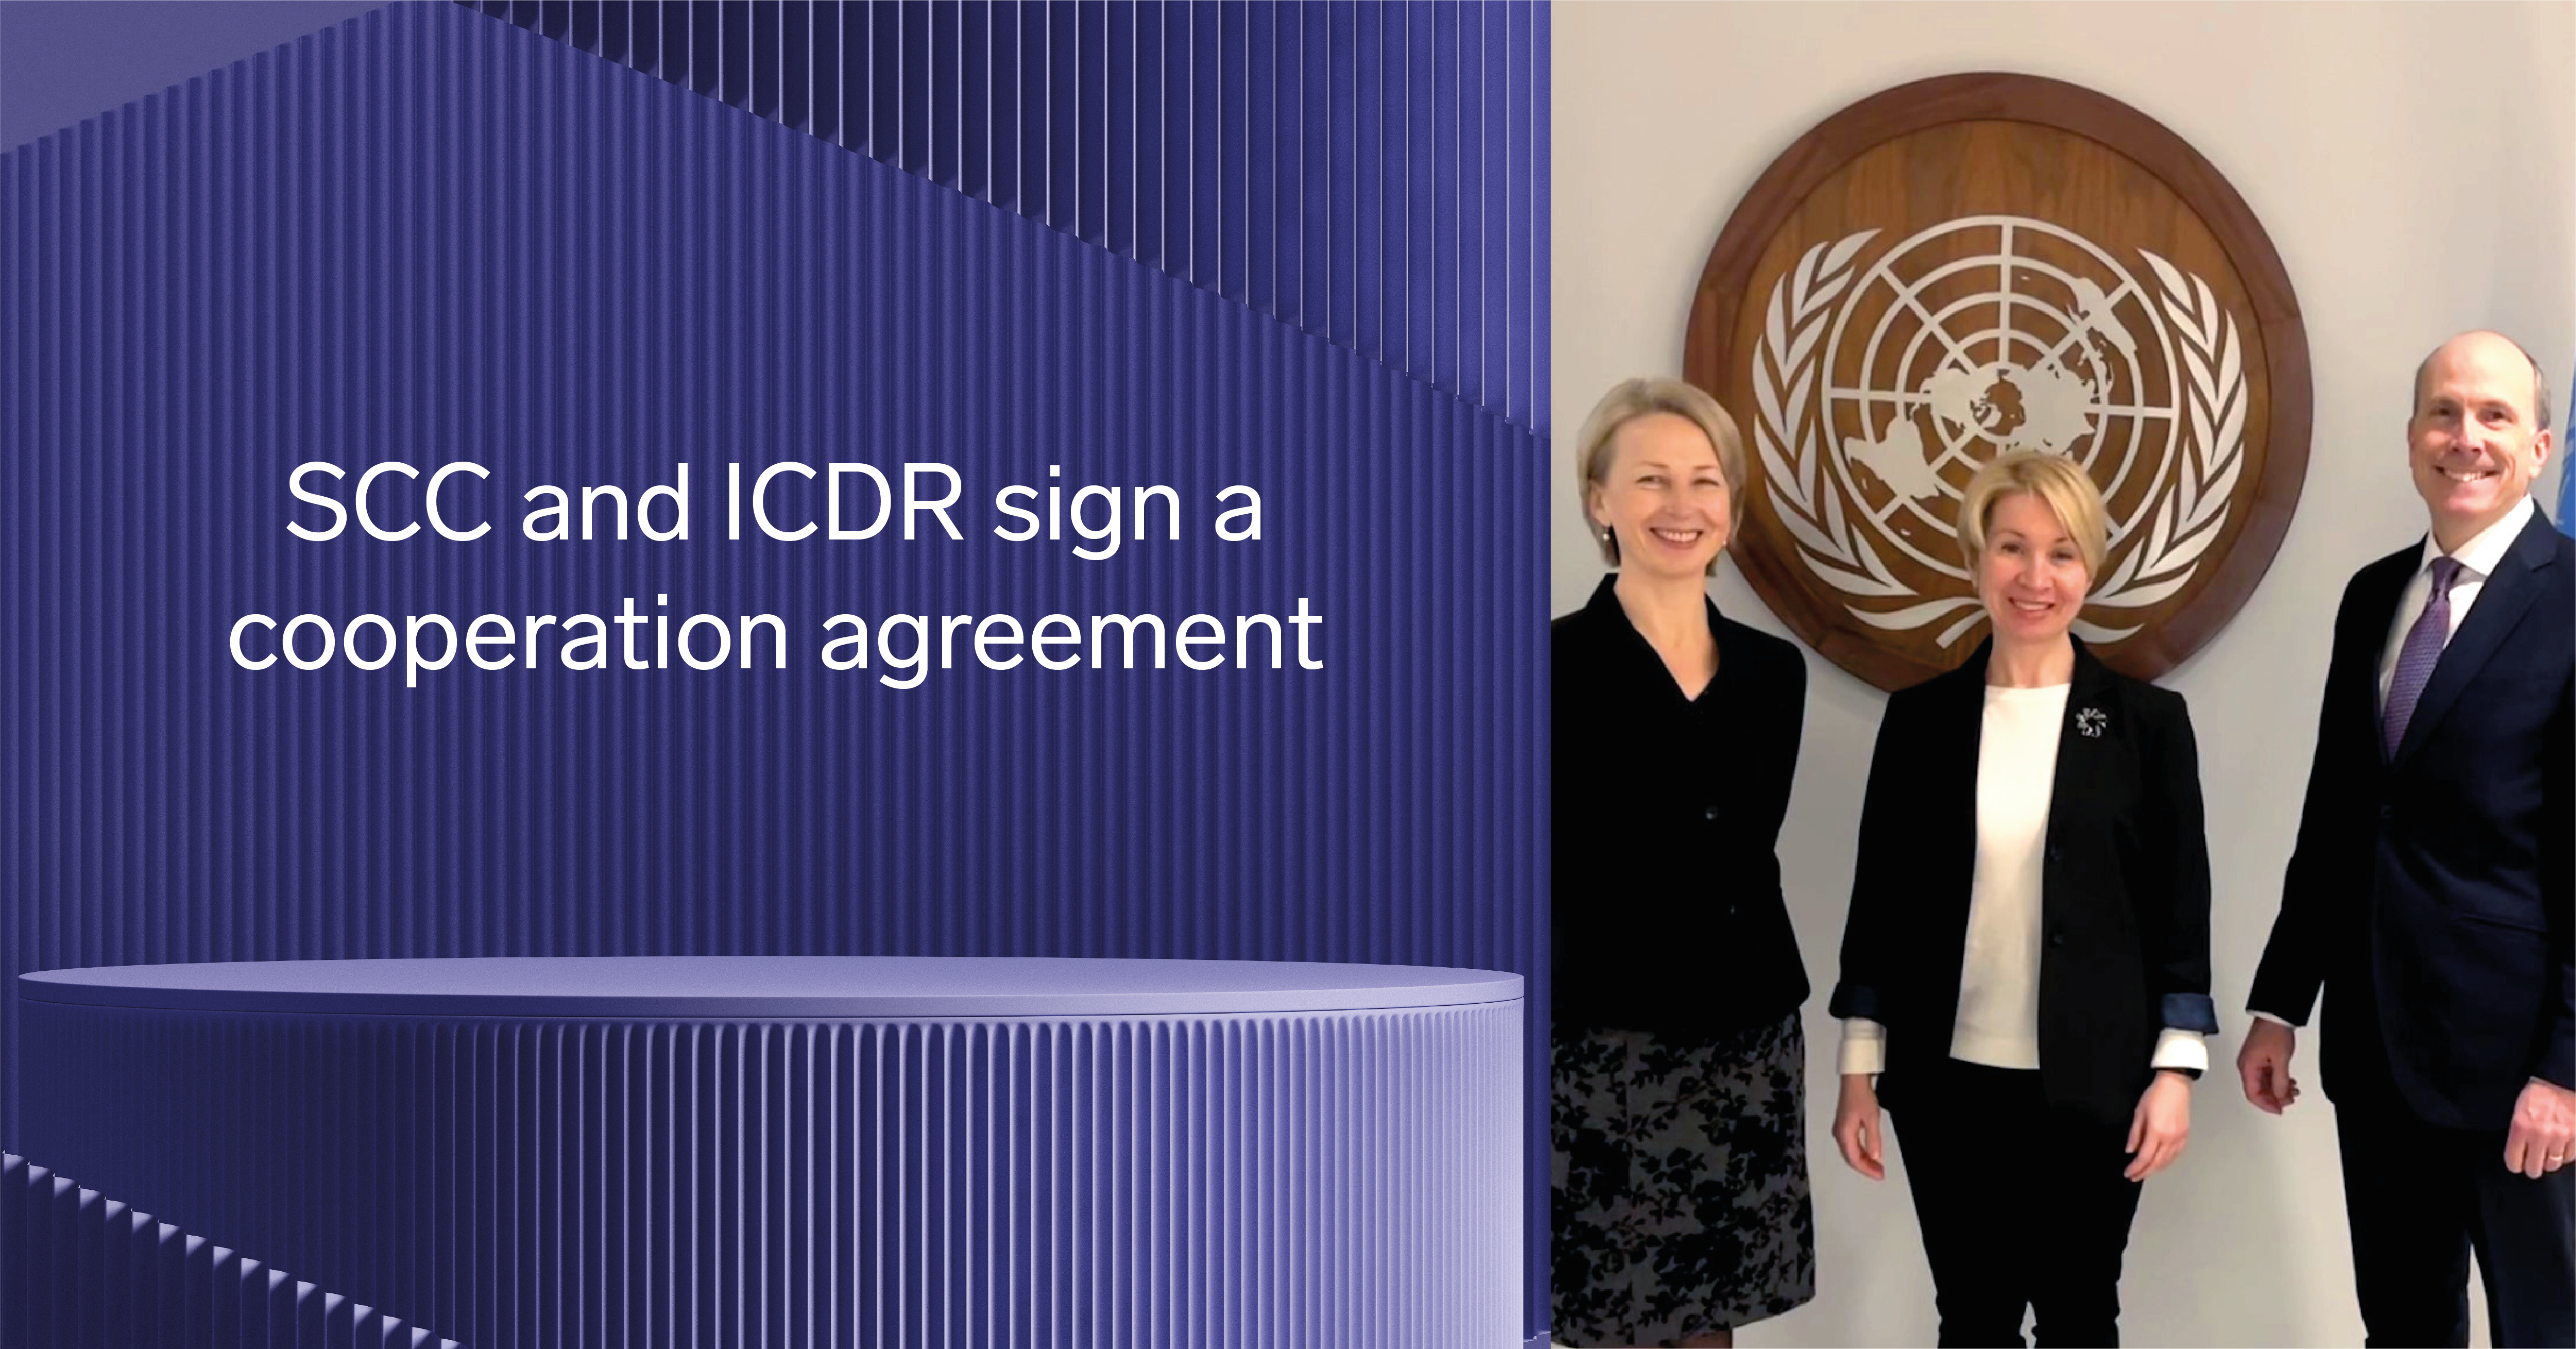 image with text "SCC and ICDR sign a cooperation agreement" and image of three representatives from the SCC and ICDR